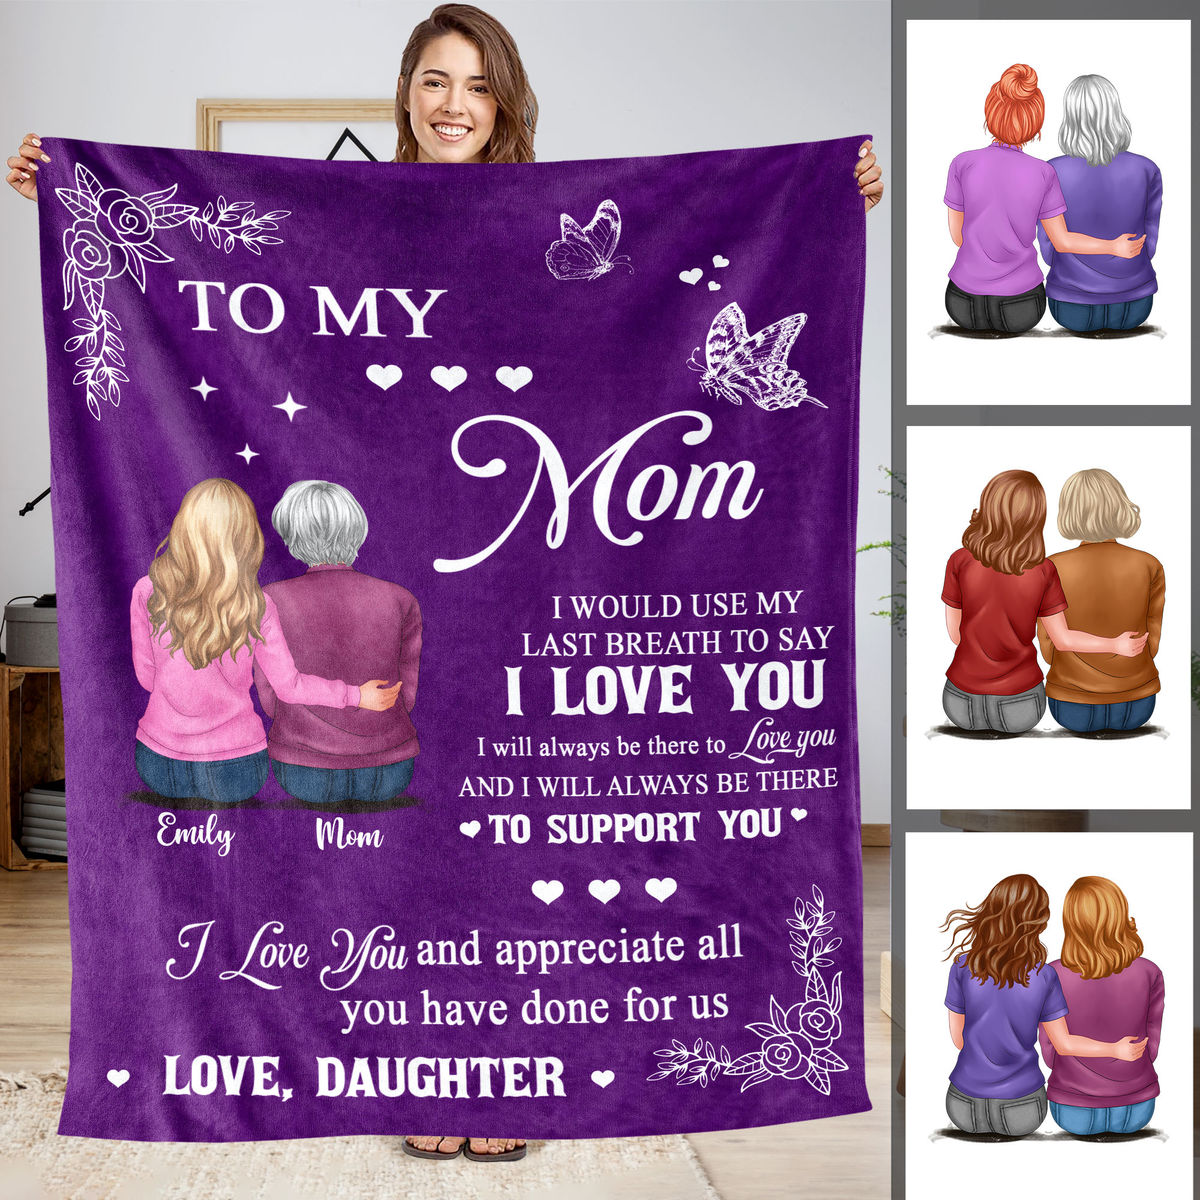 Personalized Blanket - Mother's Day Blanket - To my Mom - I Love You - Purple (2Db)